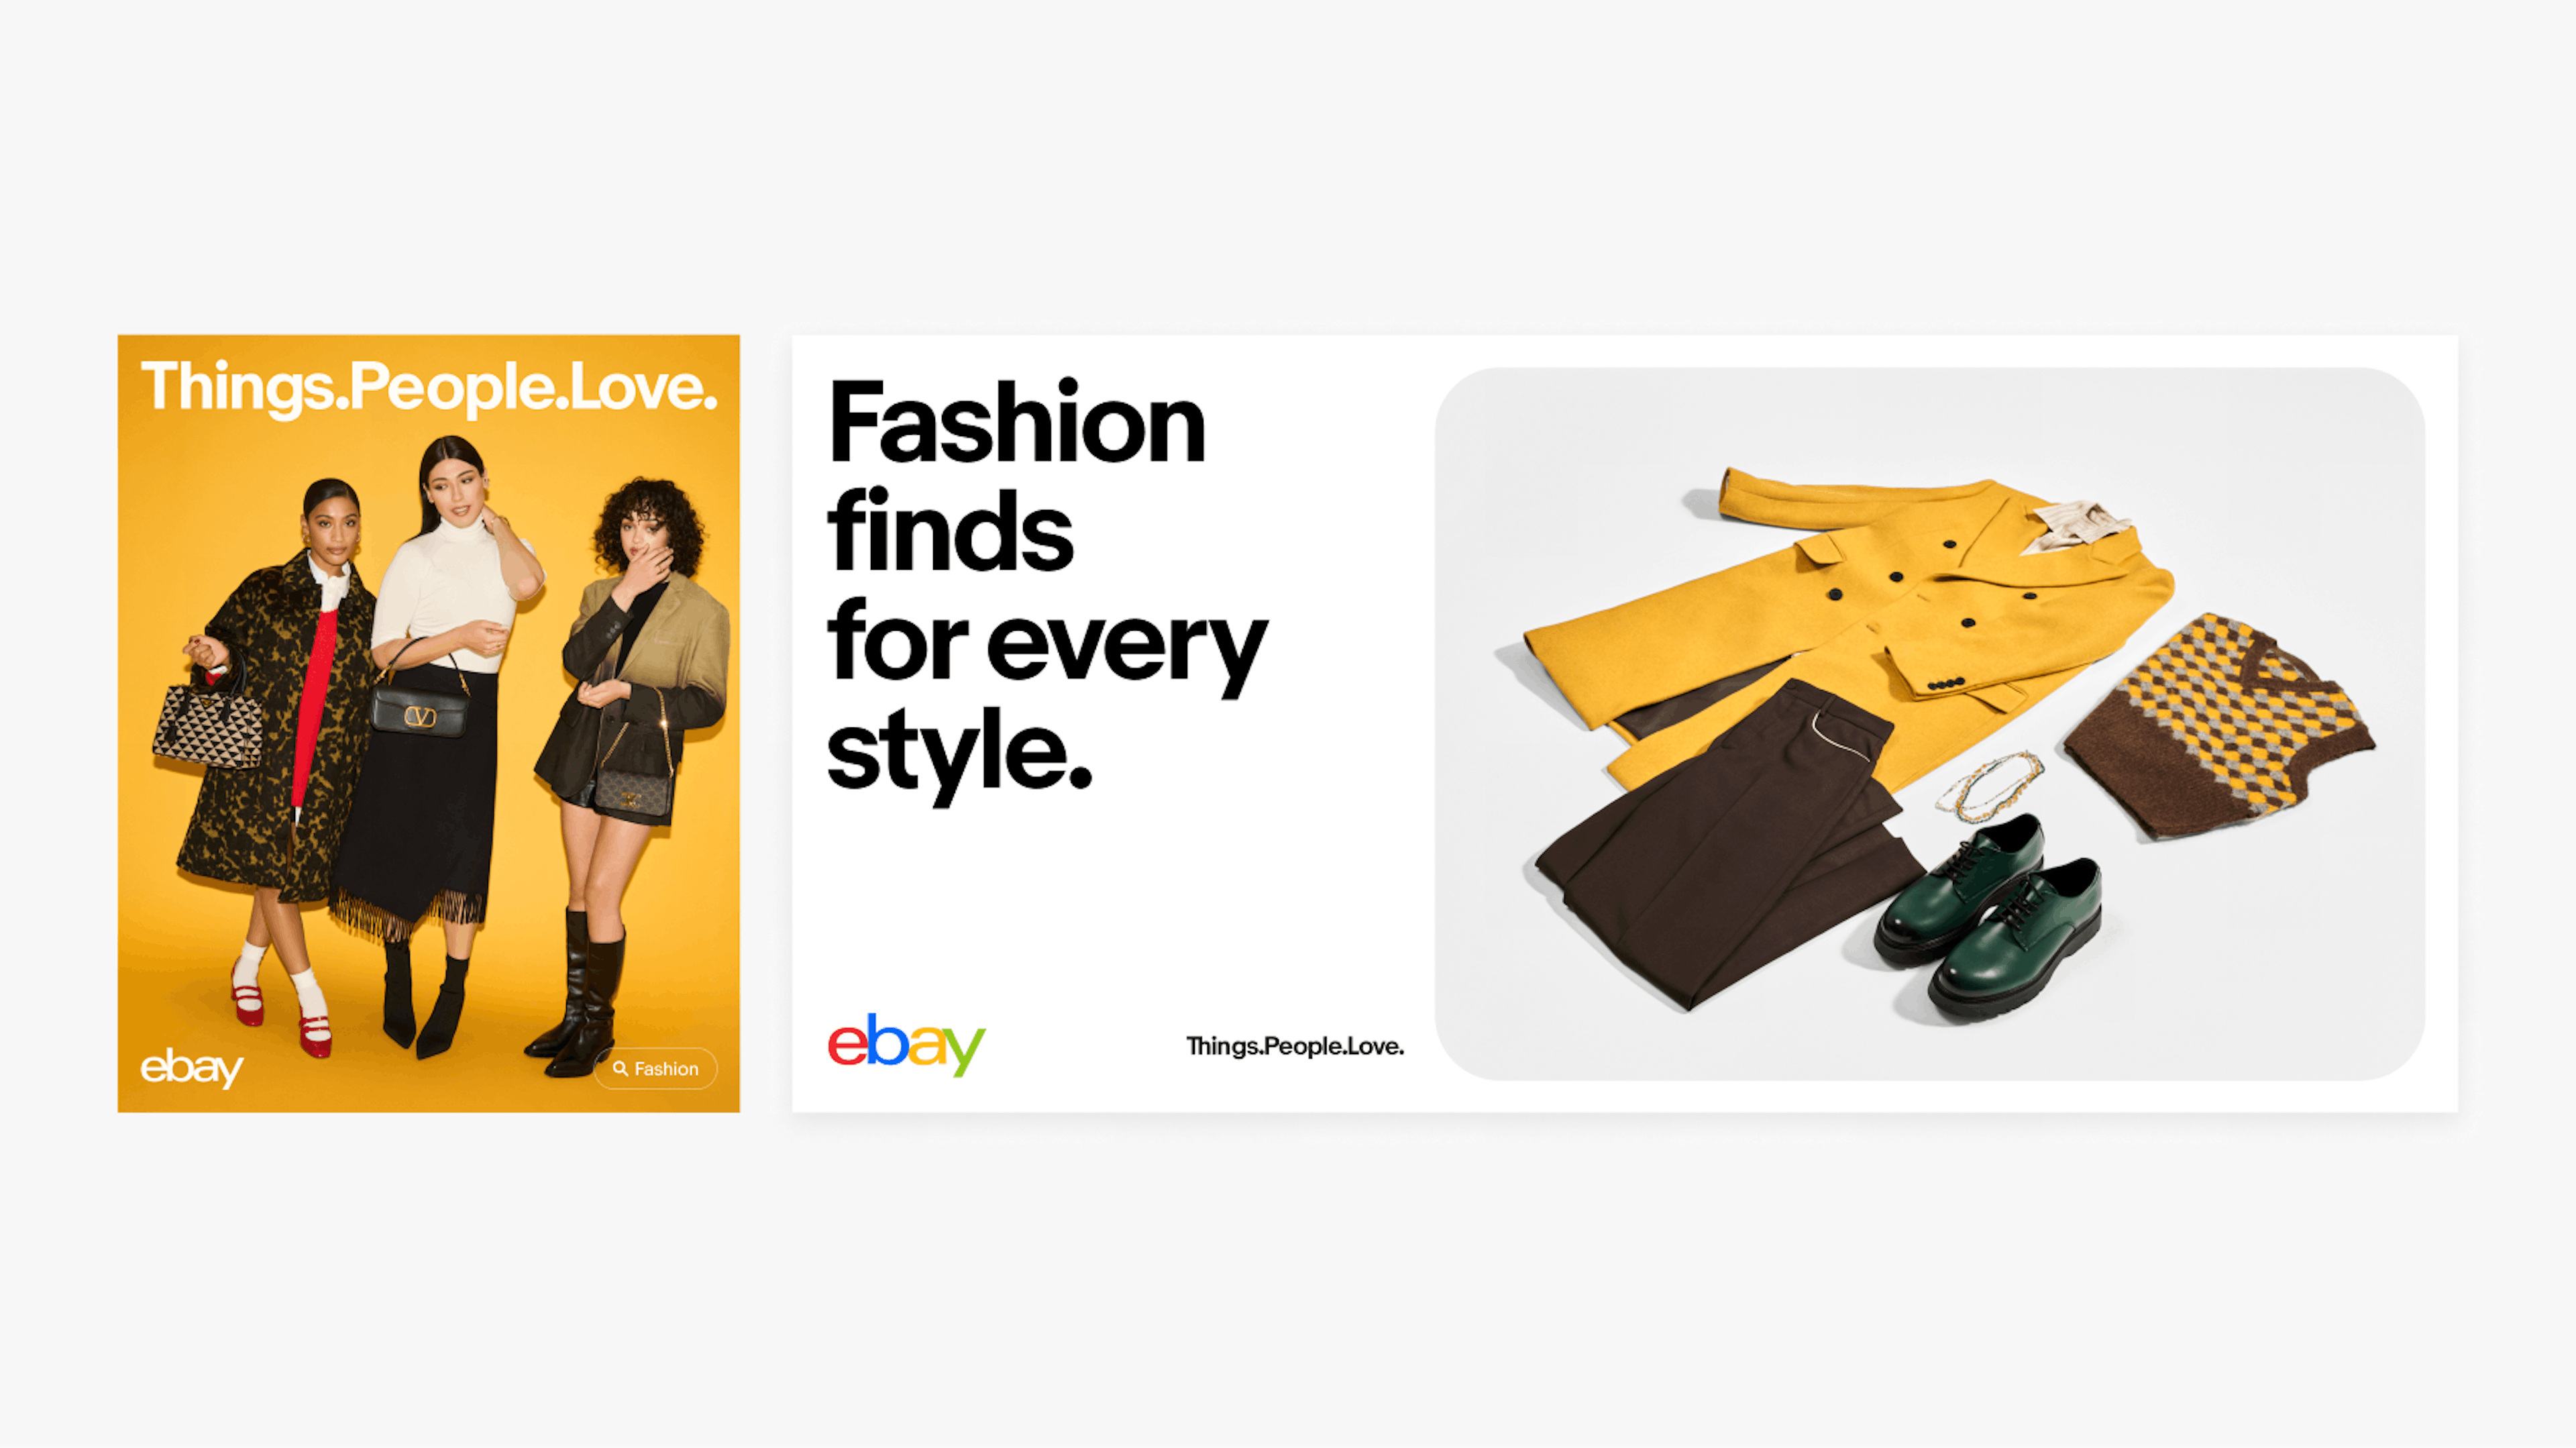 Two layouts using the eBay tagline. The first is a vibrant yellow ad promotion fashion with 3 girls and handbags. The tagline stretches across the top, with the logo in the lower left. The second is a horizontal ad with a headline on the left and image on the right. The logo is in the lower left, and the tagline is placed to the right of it.